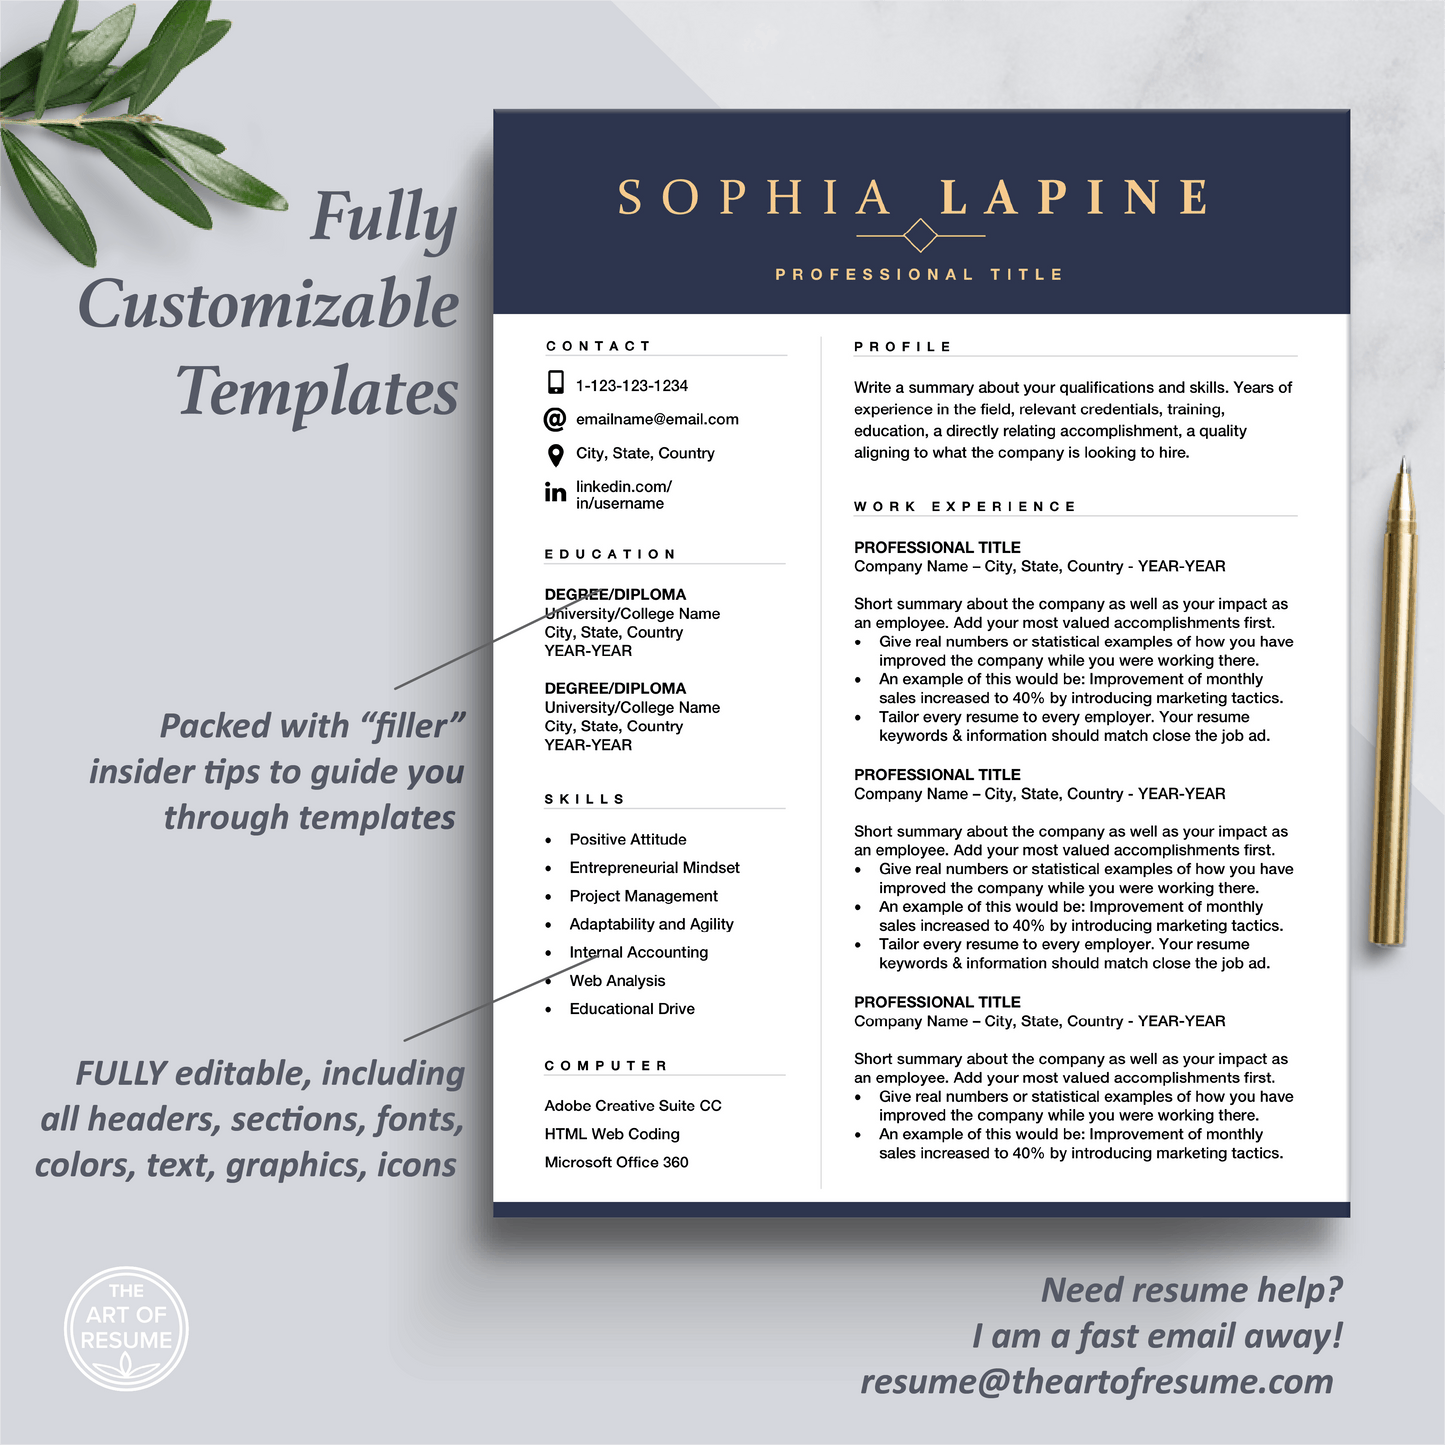 The Art of Resume Templates | One Page Professional Navy Blue Professional Resume CV Design Template Maker | Curriculum Vitae